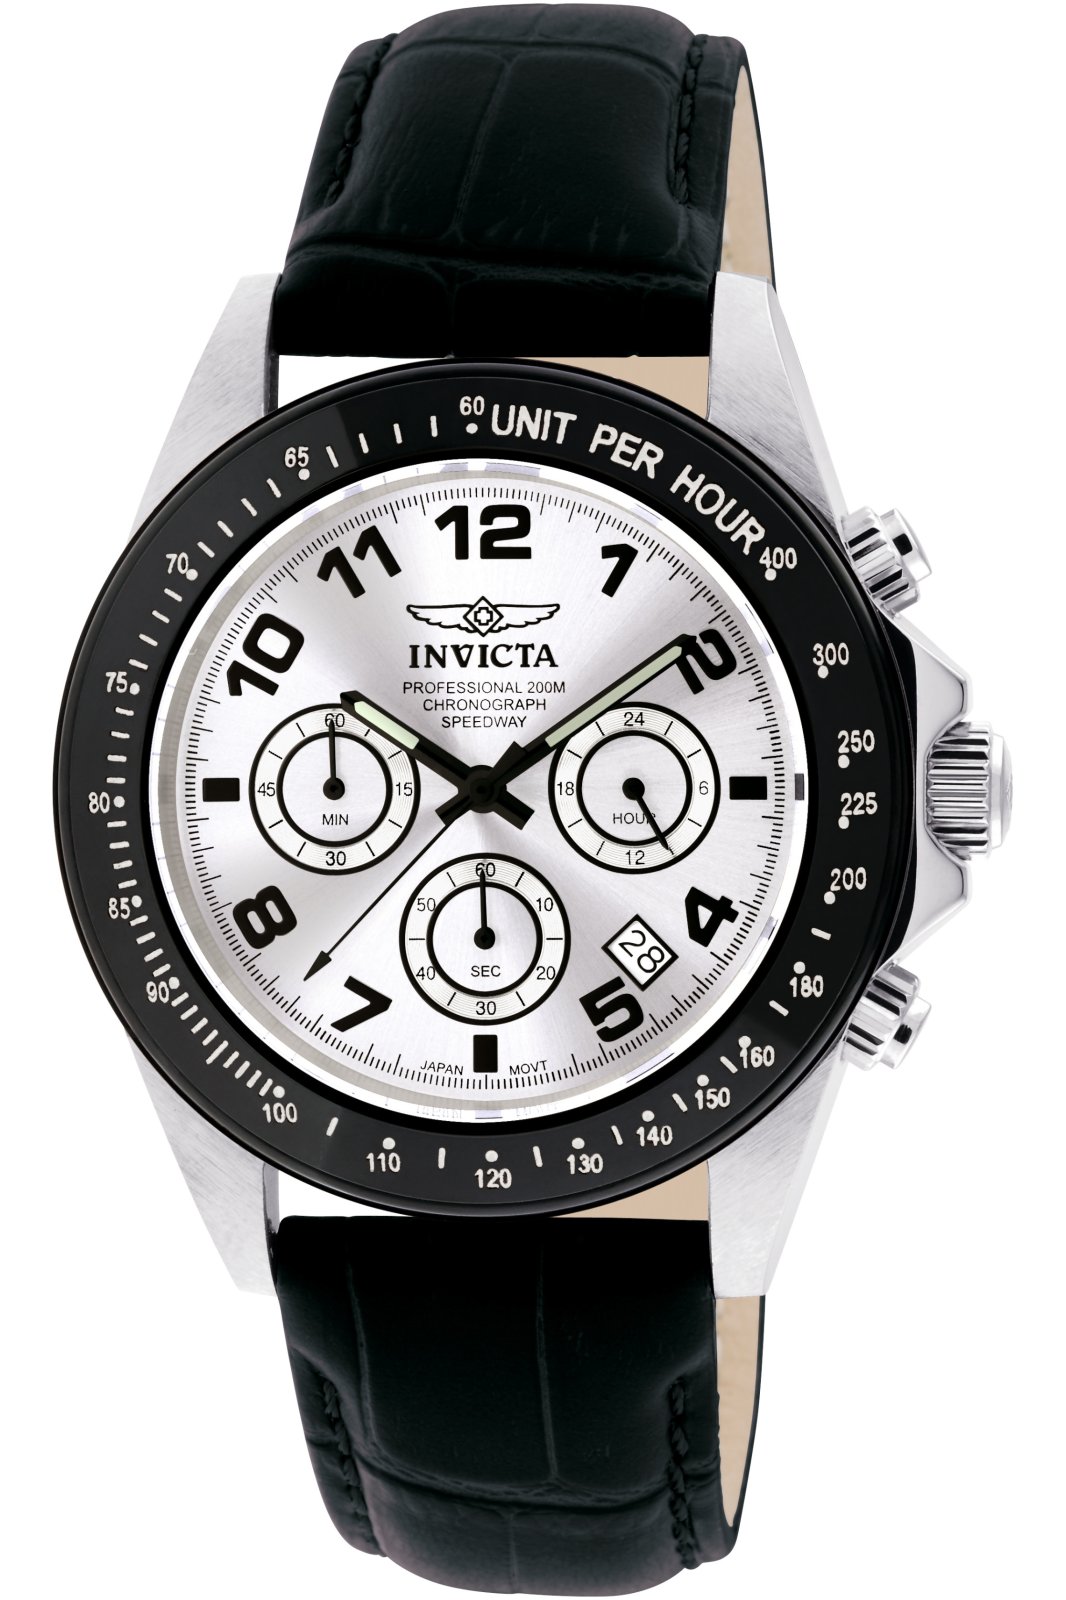 Invicta Watch Speedway 10708 - Official Invicta Store - Buy Online!